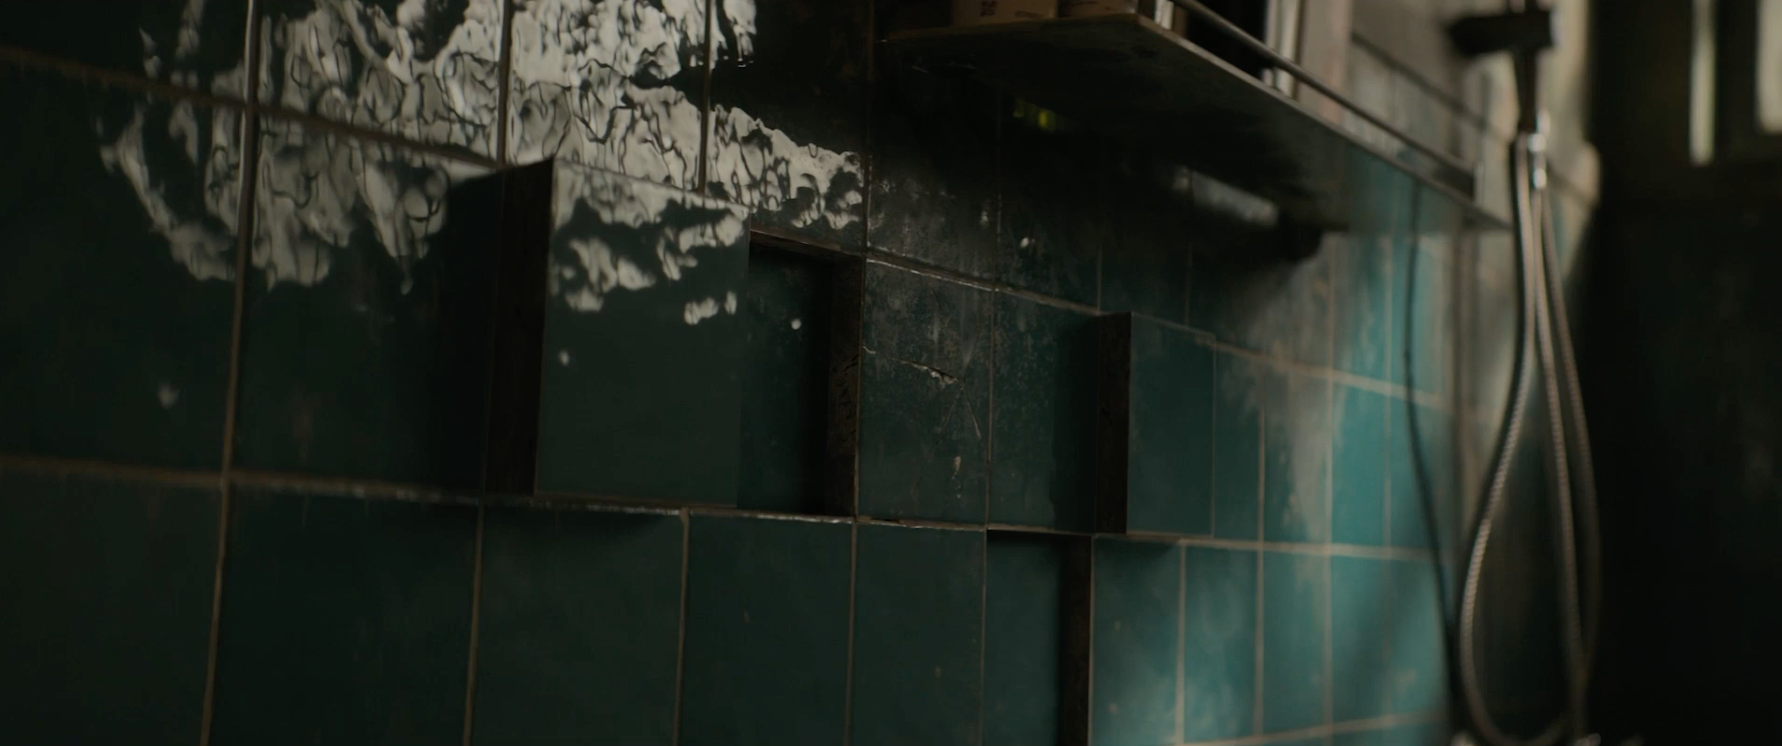 A dimly lit bathroom showcasing green-tiled walls with cracks and stains, a shelf with soap, and a showerhead